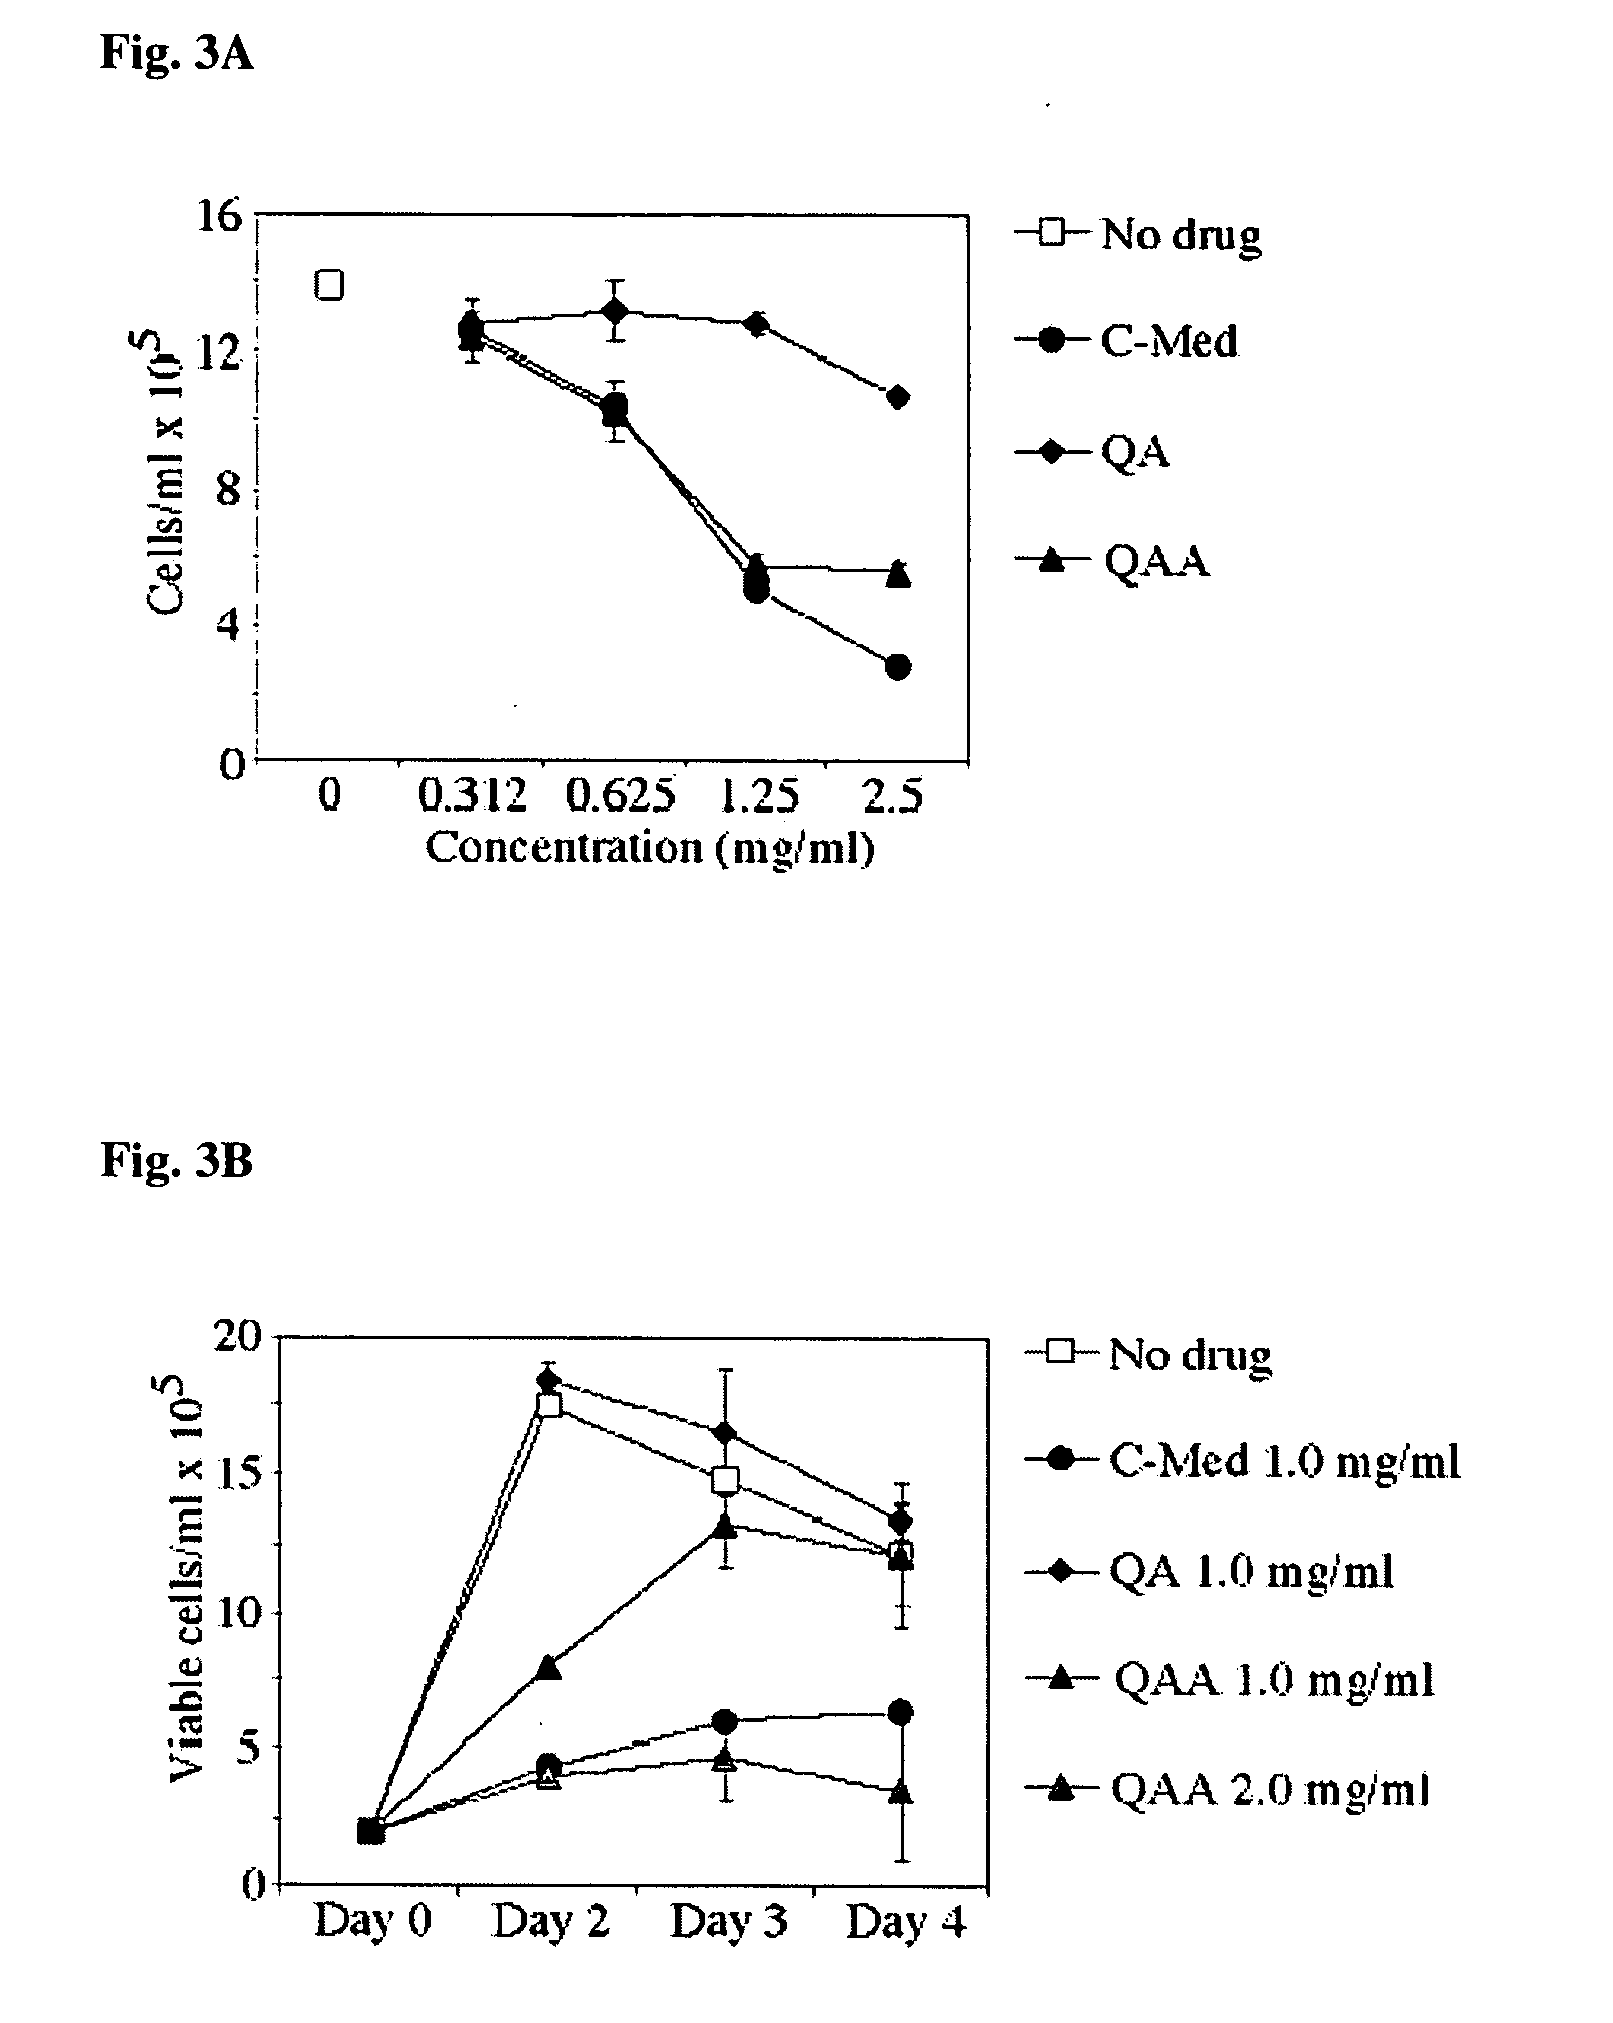 Method of preparation and composition of a water soluble extract of the bioactive component of the plant species uncaria for enhancing immune, anti-inflammatory, anti-tumor and DNA repair processes of warm blooded animals